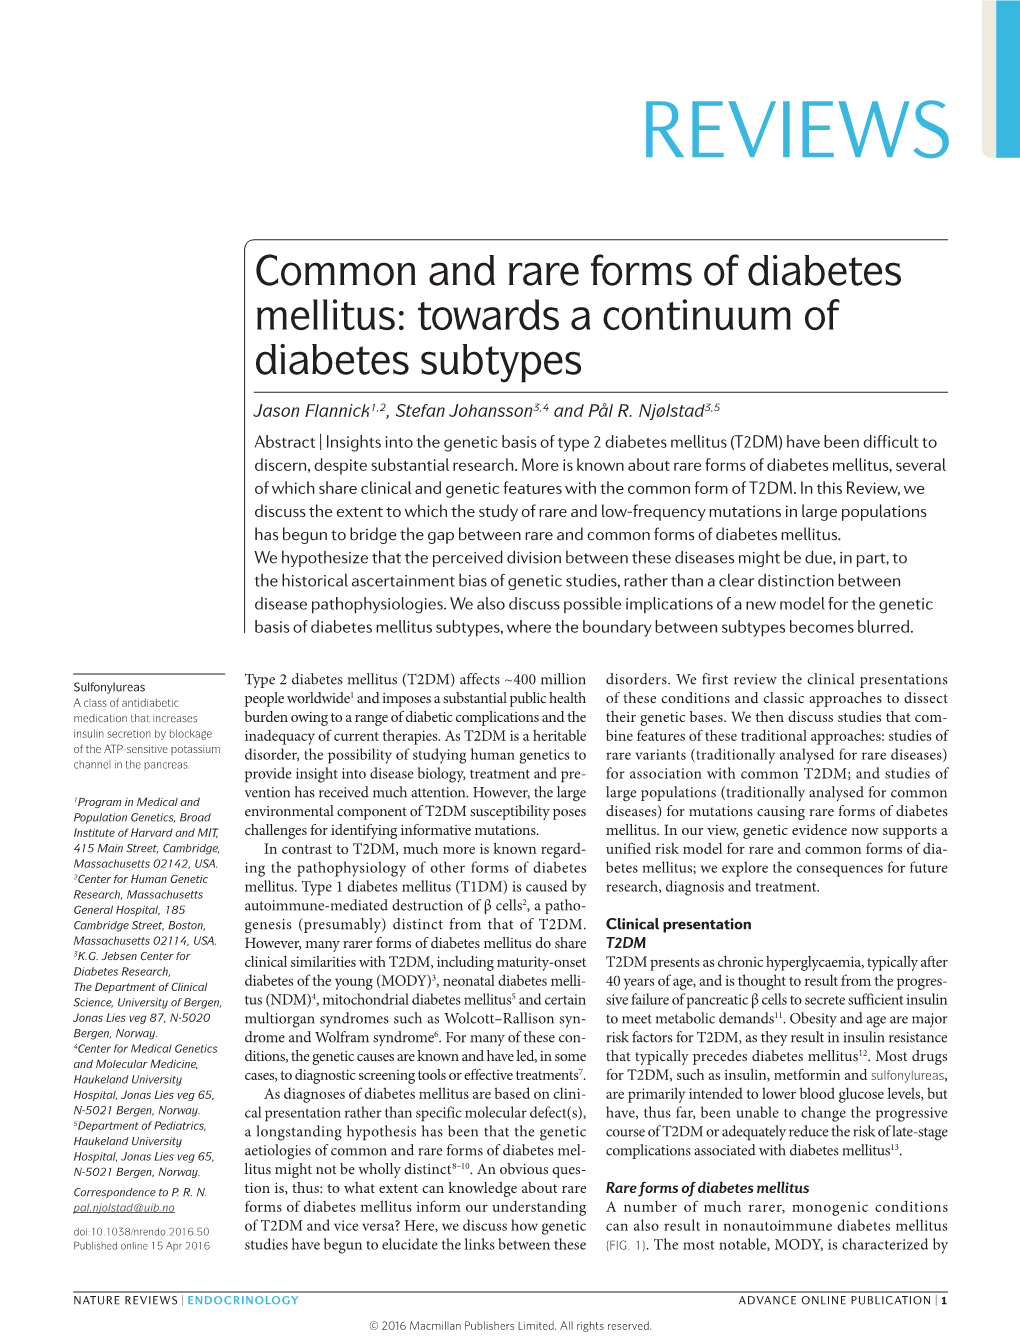 Common and Rare Forms of Diabetes Mellitus: Towards a Continuum of Diabetes Subtypes